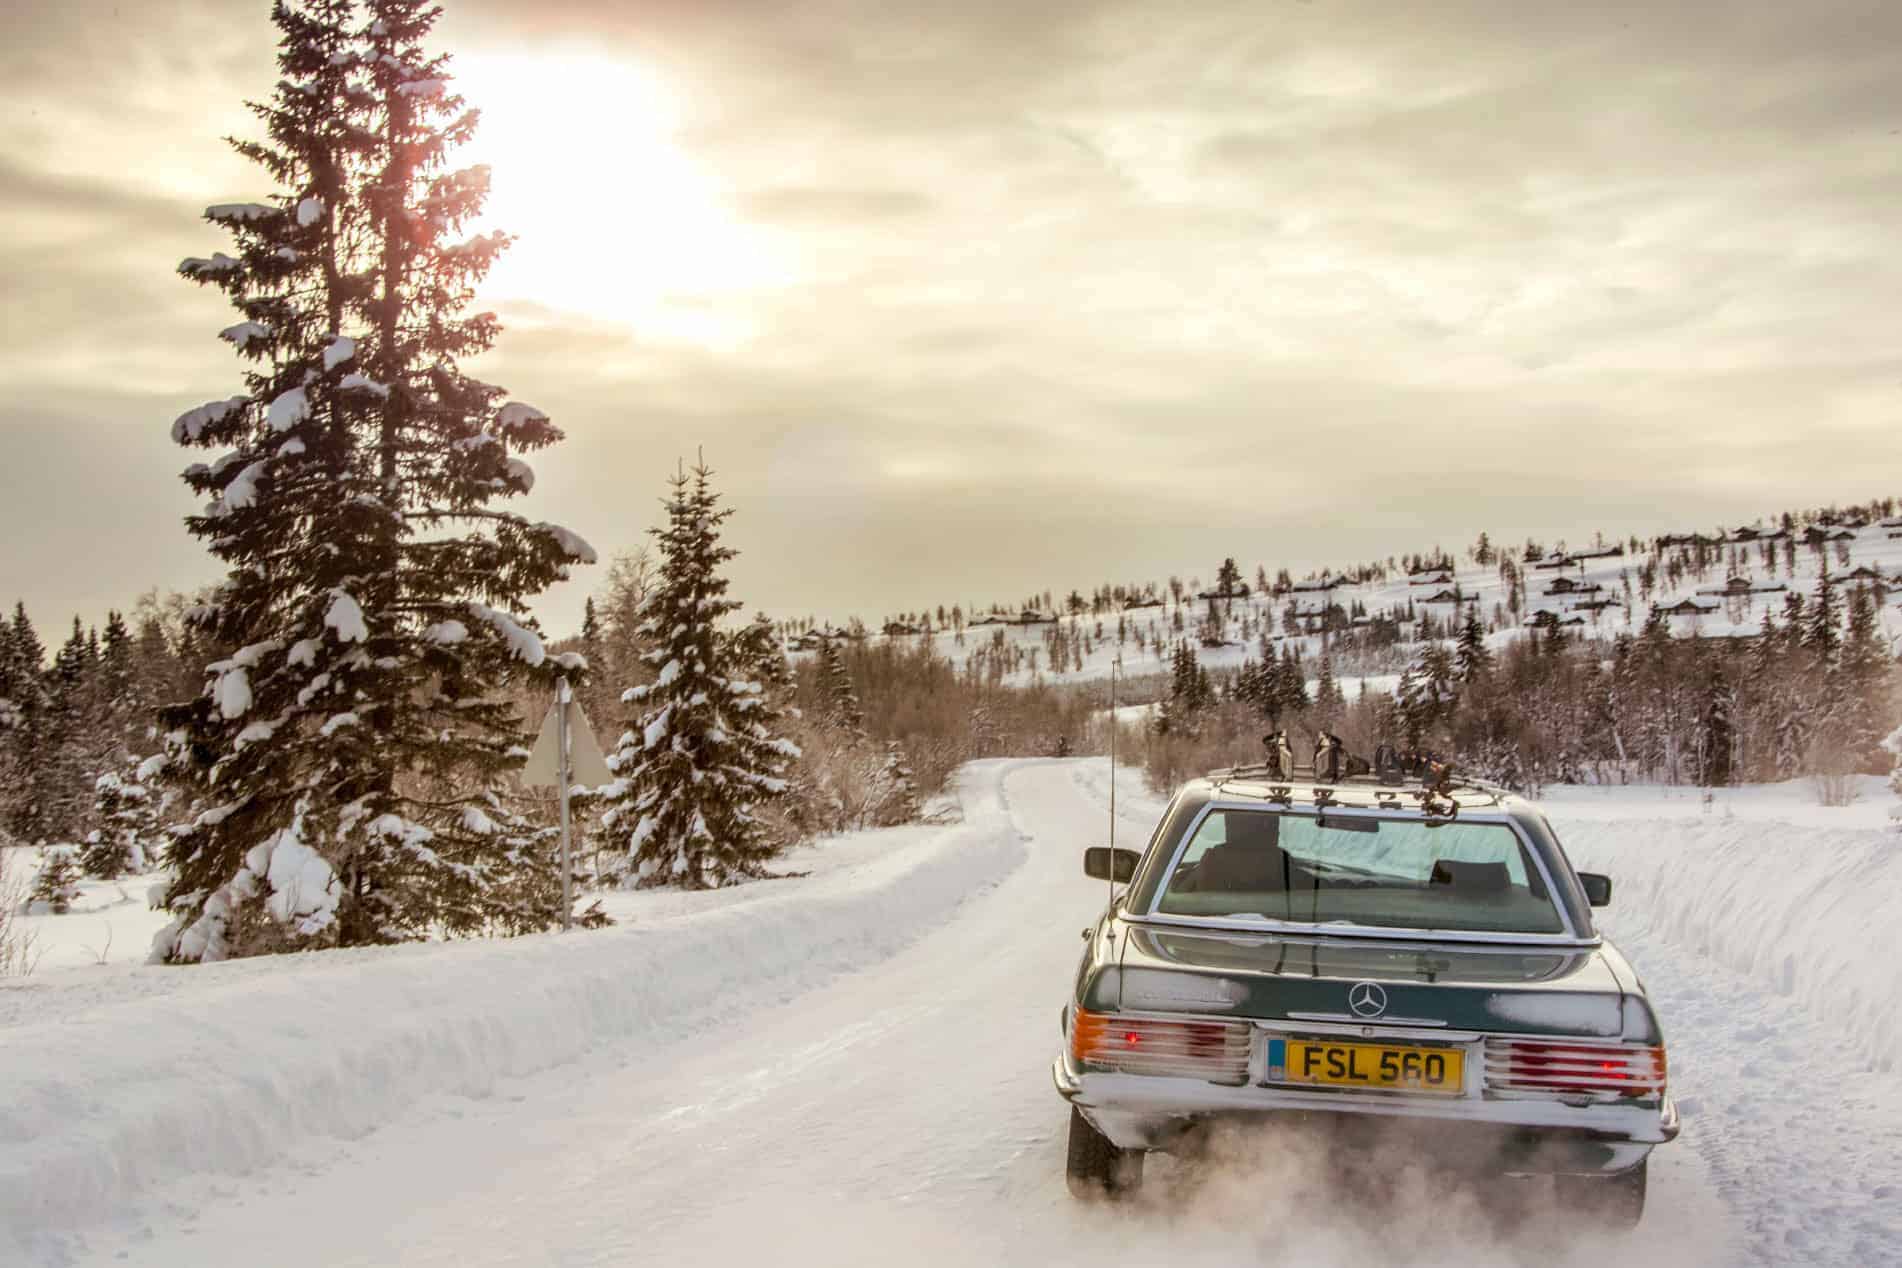 1980s Mercedes 560SL tackling Norway's snowy roads.